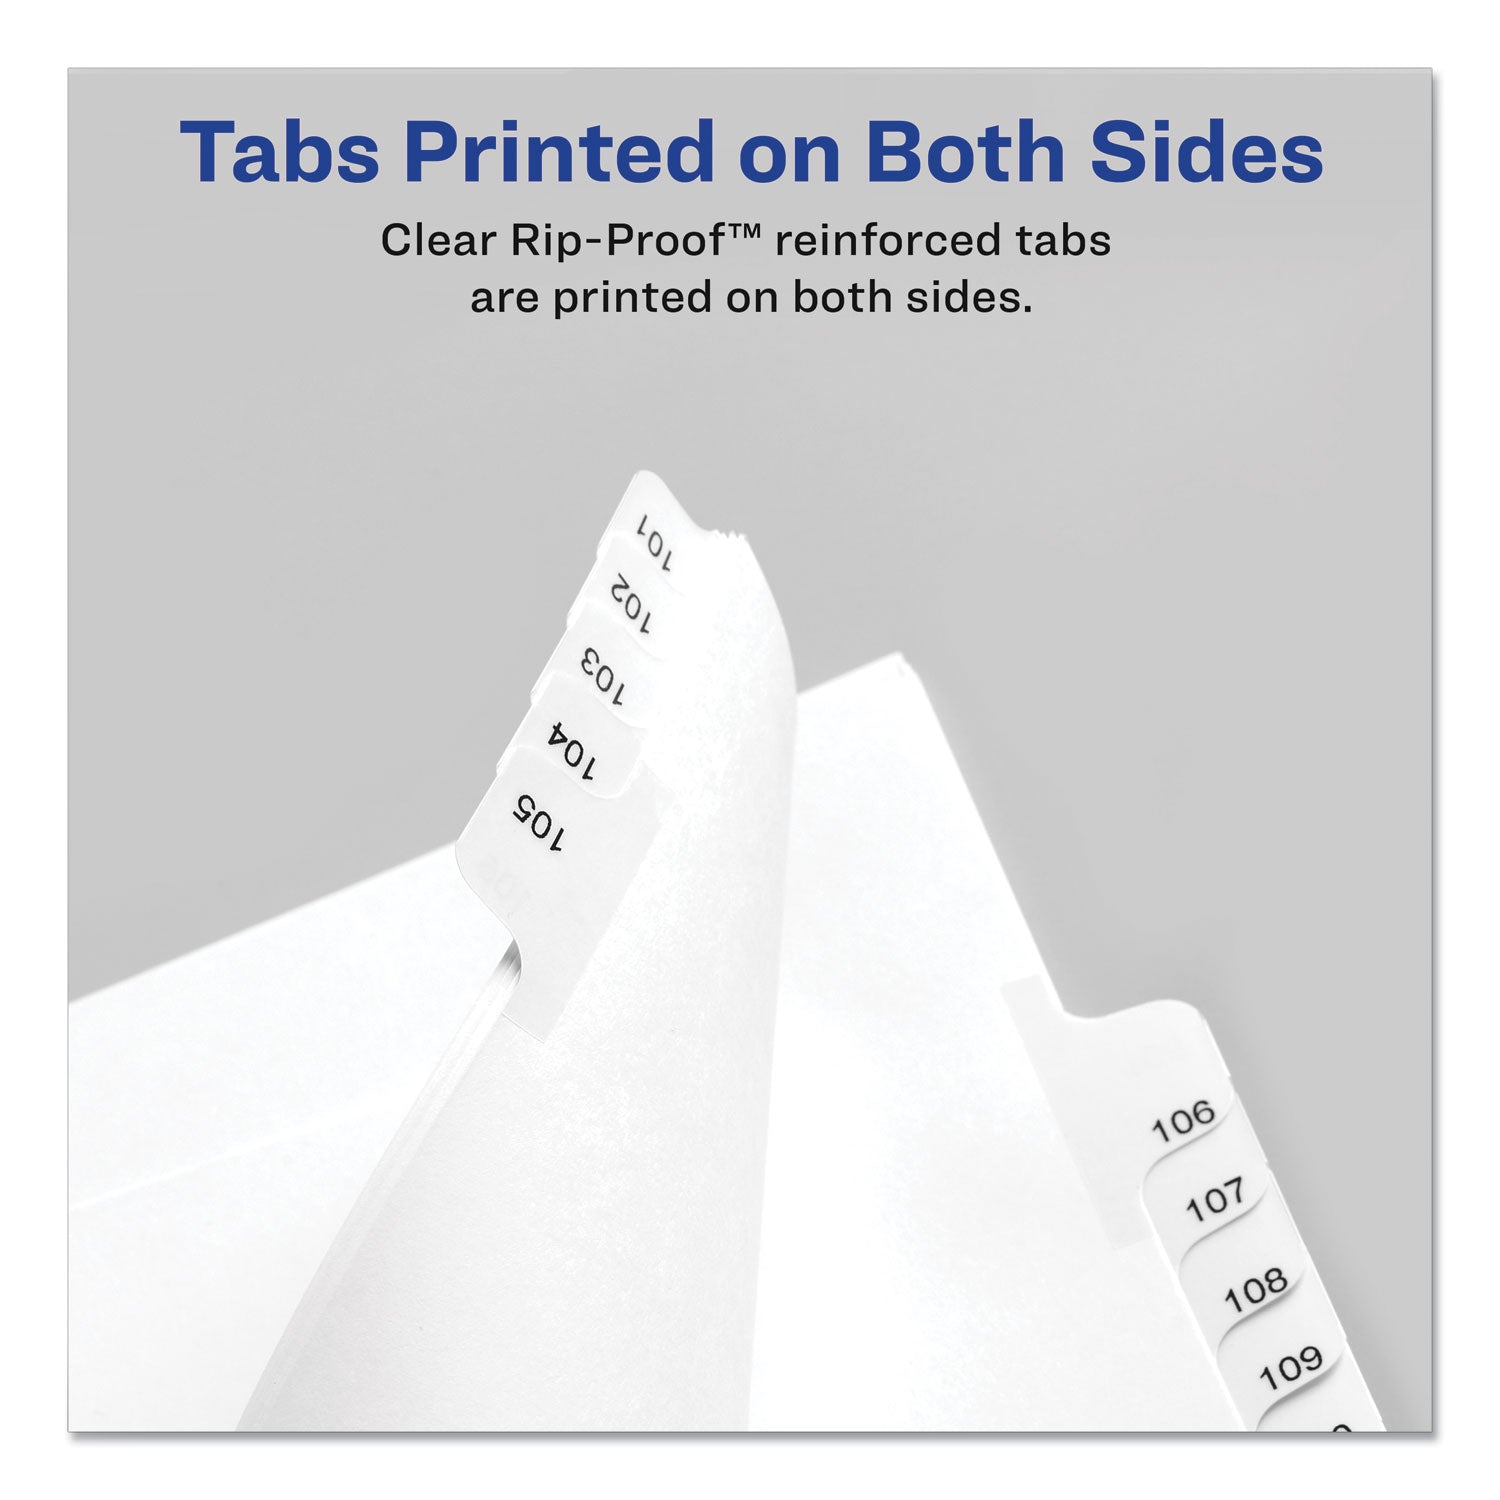 Preprinted Legal Exhibit Side Tab Index Dividers, Allstate Style, 10-Tab, 5, 11 x 8.5, White, 25/Pack - 